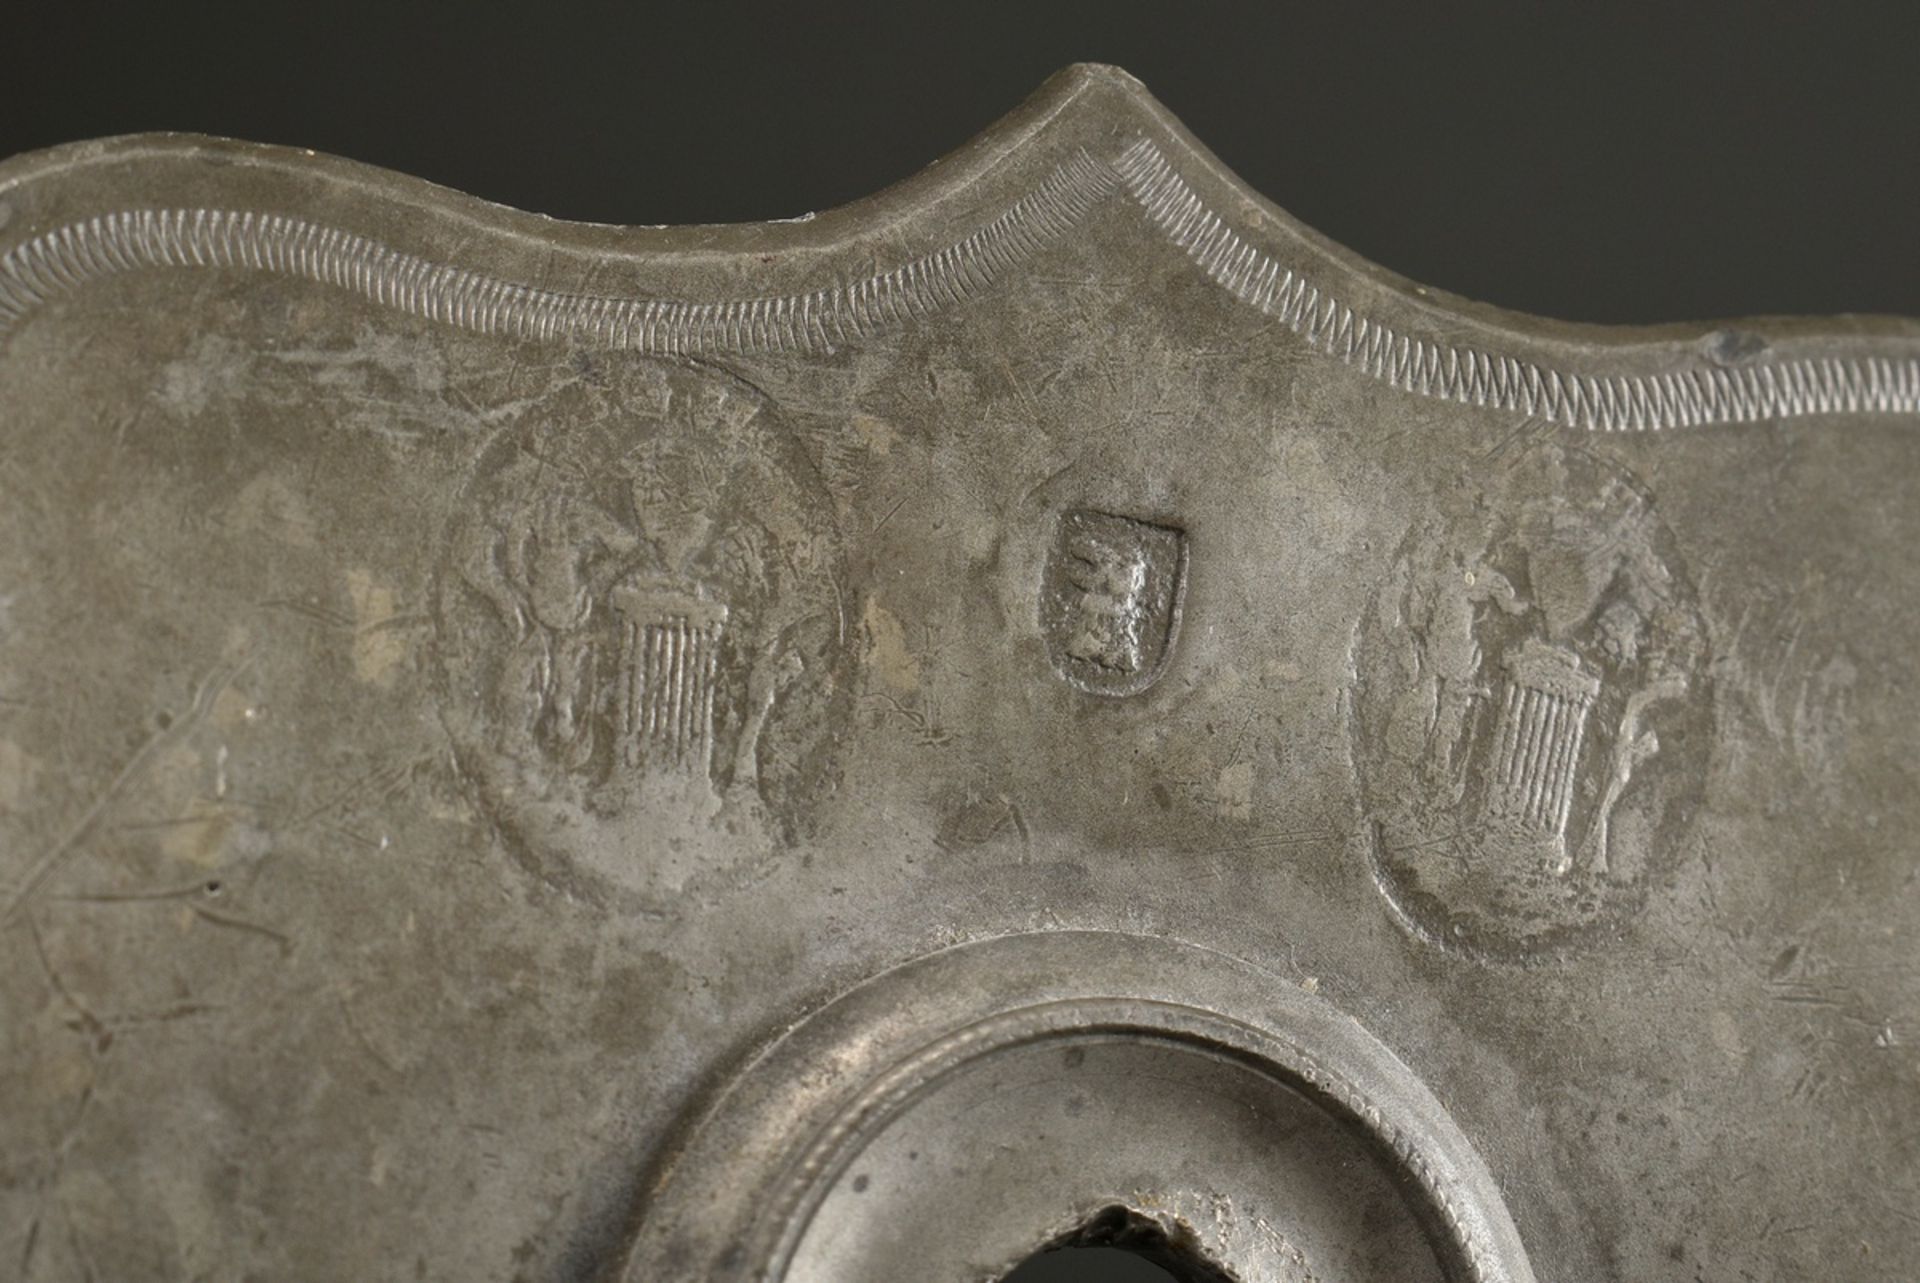 Pewter salt cellar with embossed floral frieze, engraved ‘JMLS 1859’ on the front, town mark probab - Image 4 of 7